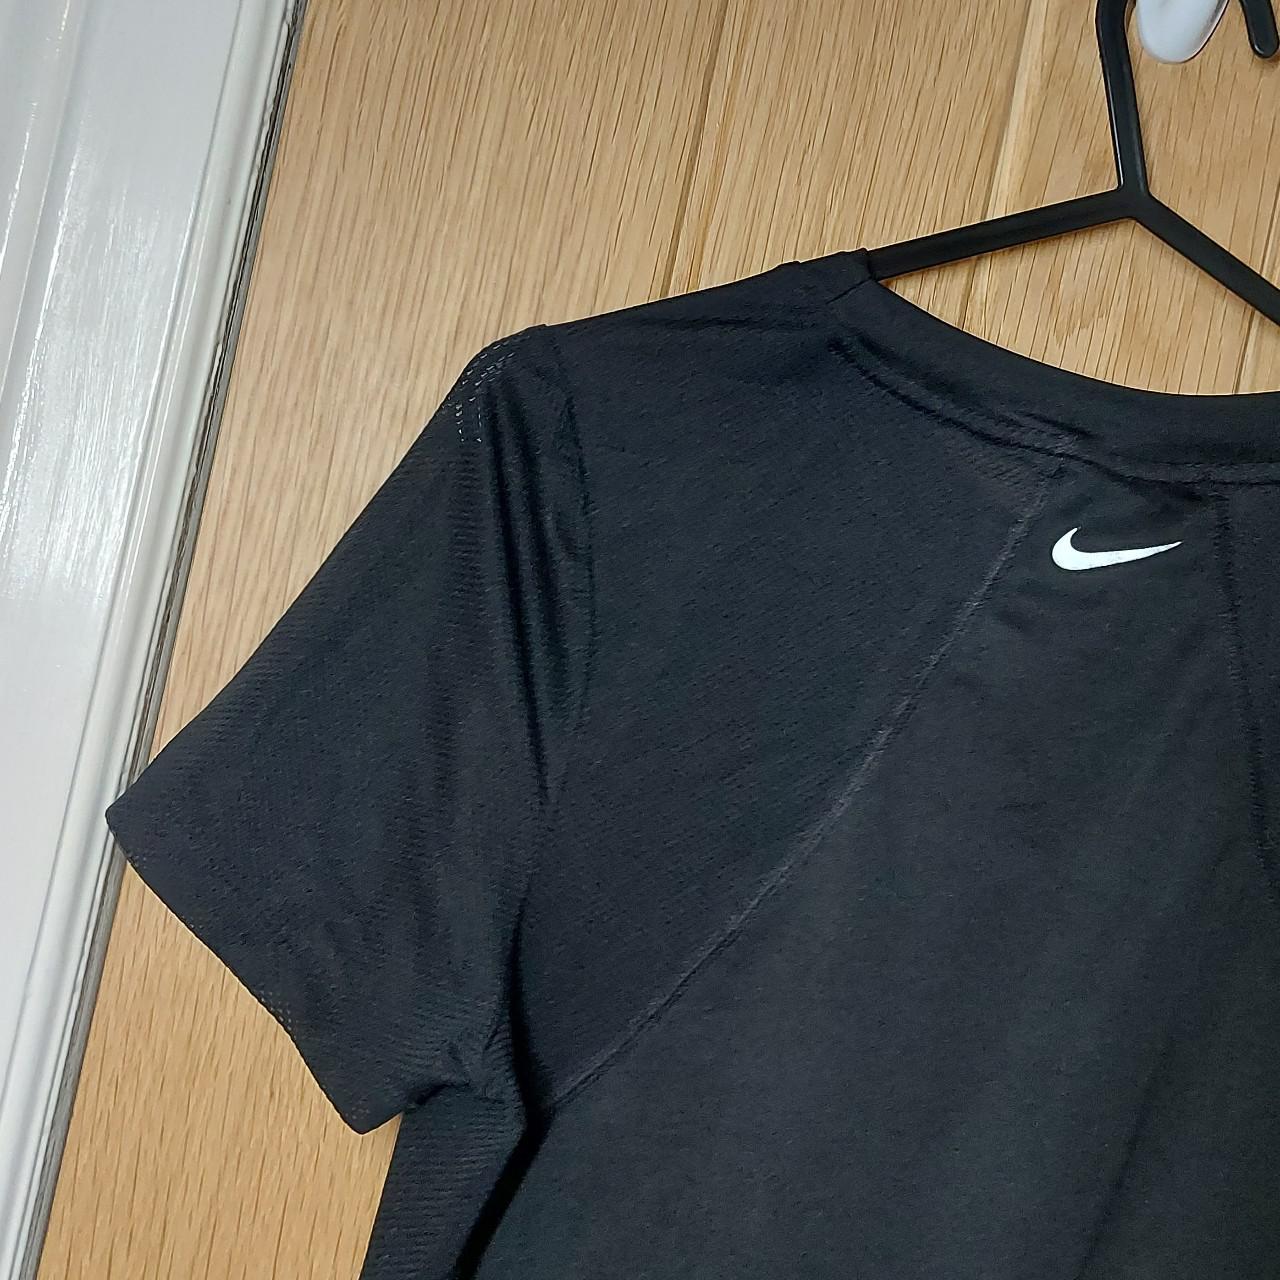 Product Image 2 - Nike Running Top with Mesh